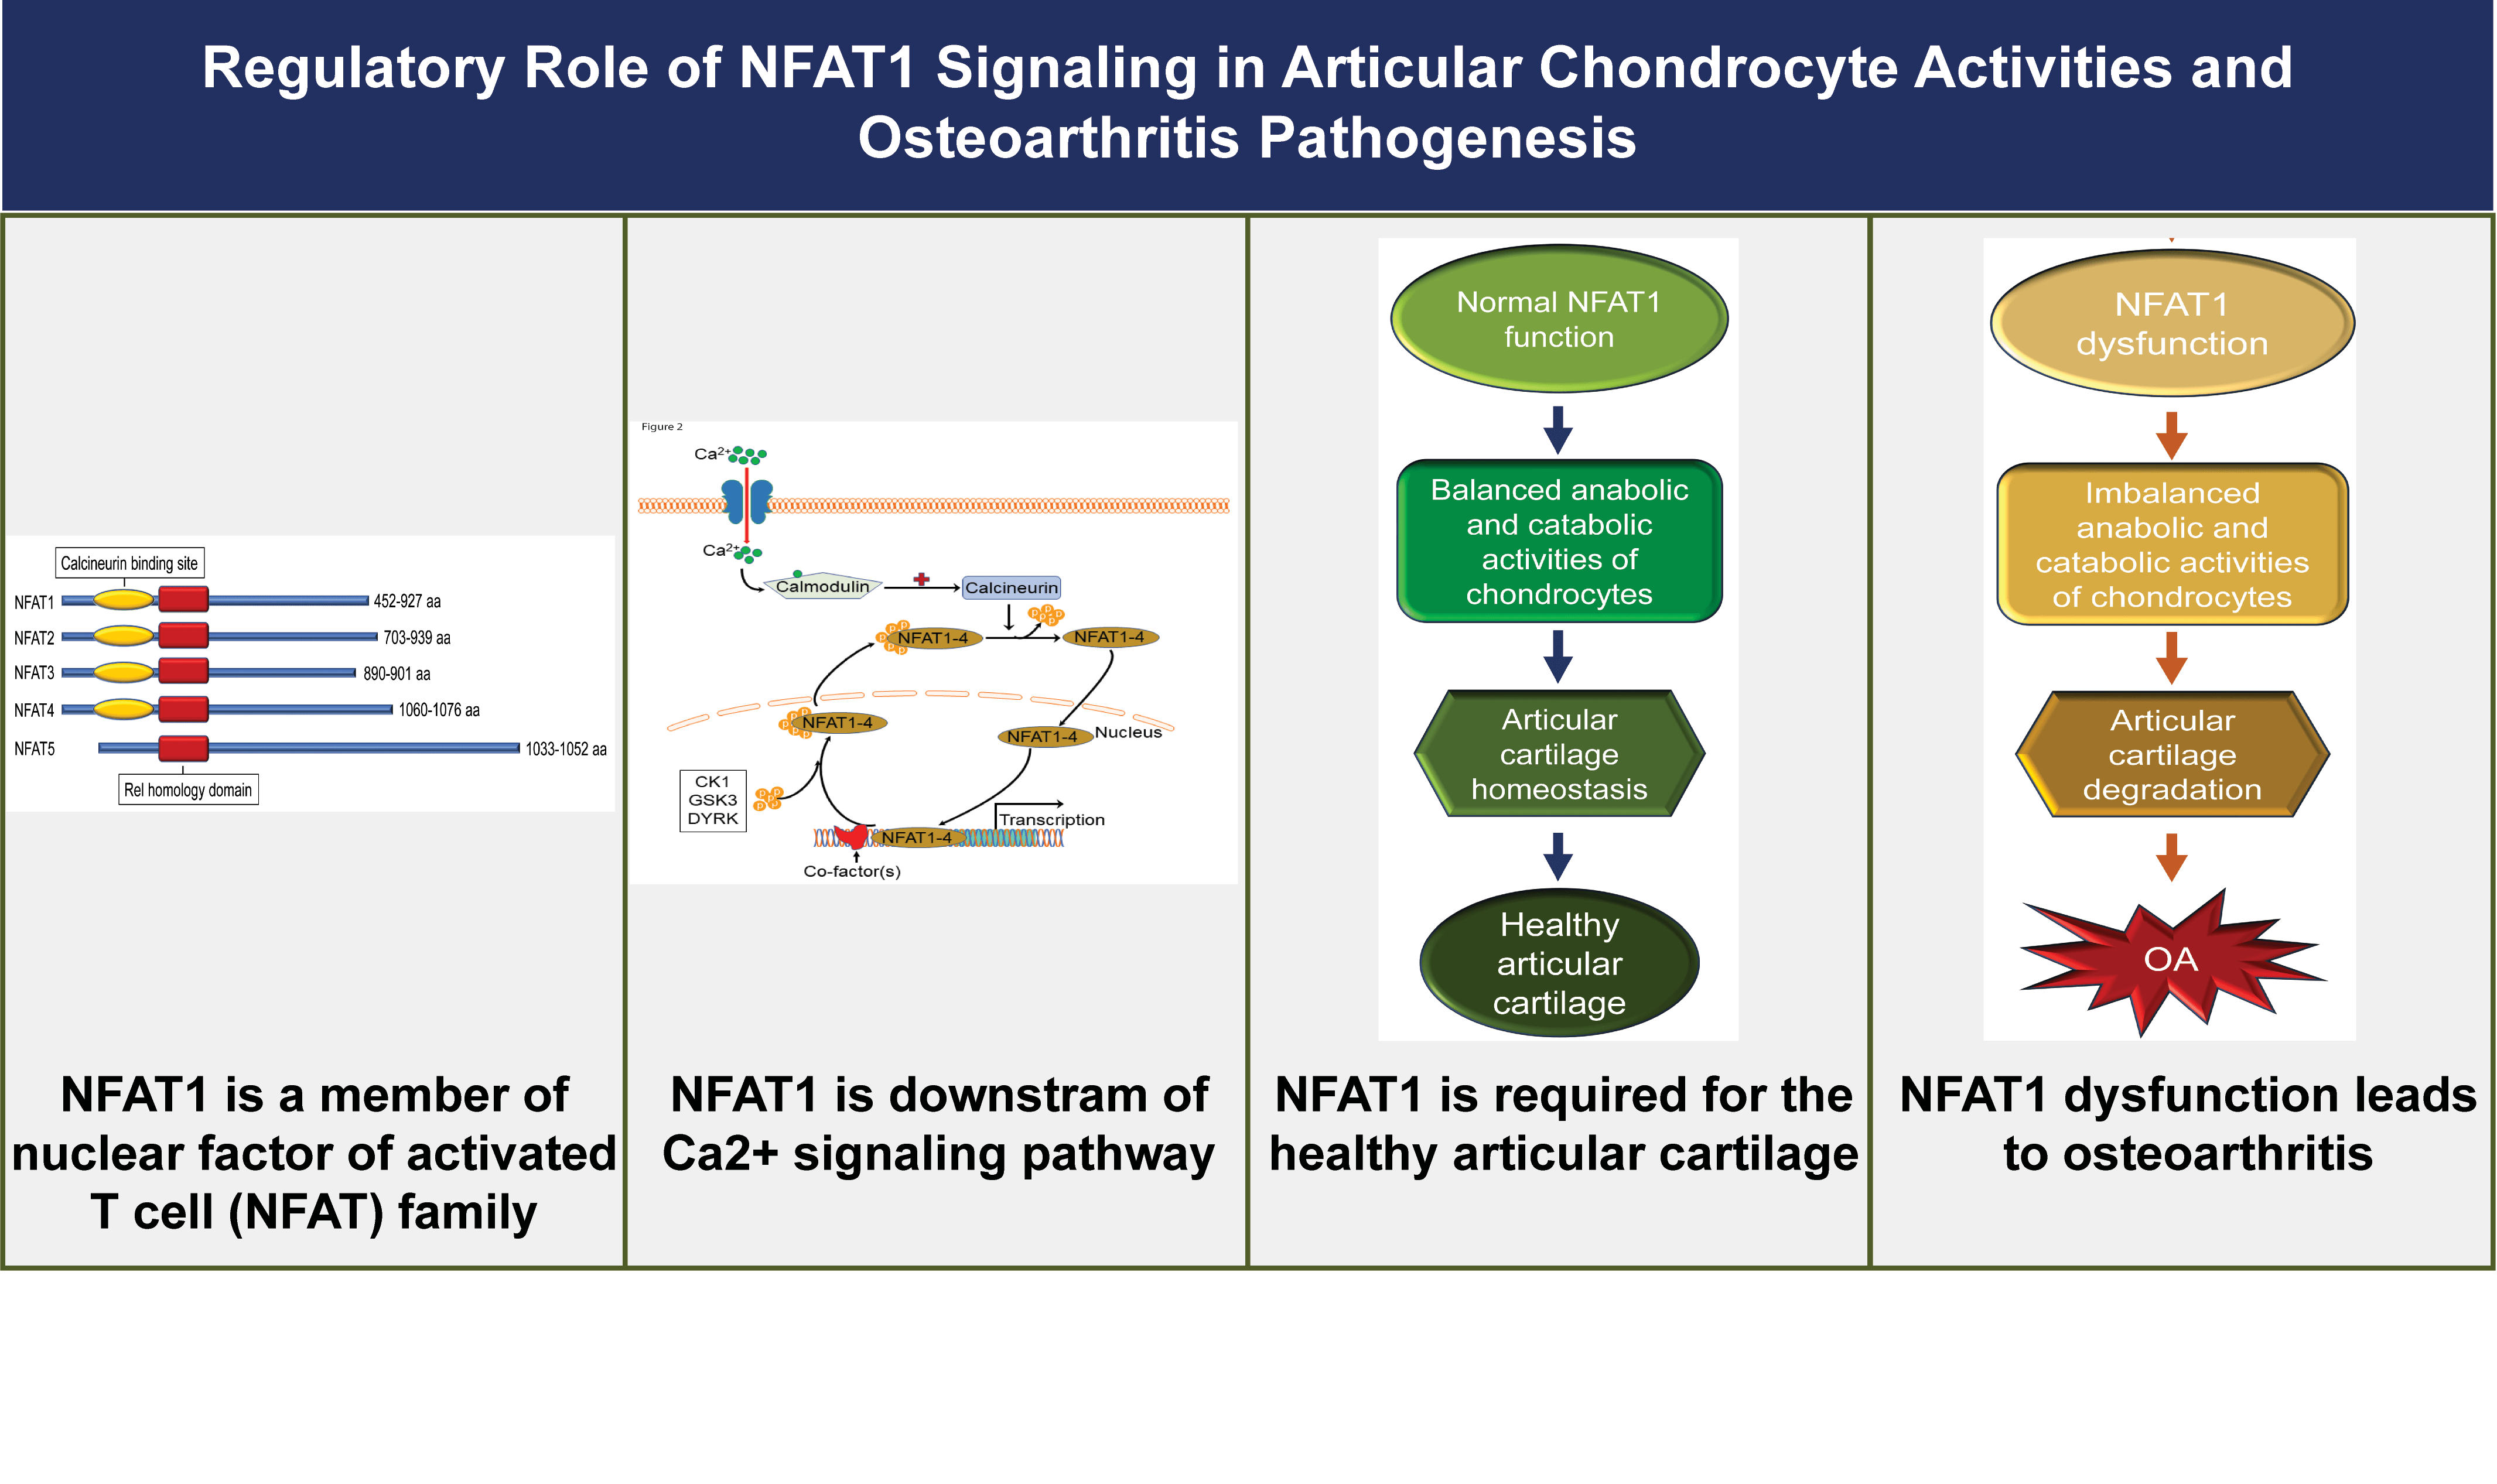 Regulatory role of NFAT1 signaling in articular chondrocyte activities and osteoarthritis pathogenesis